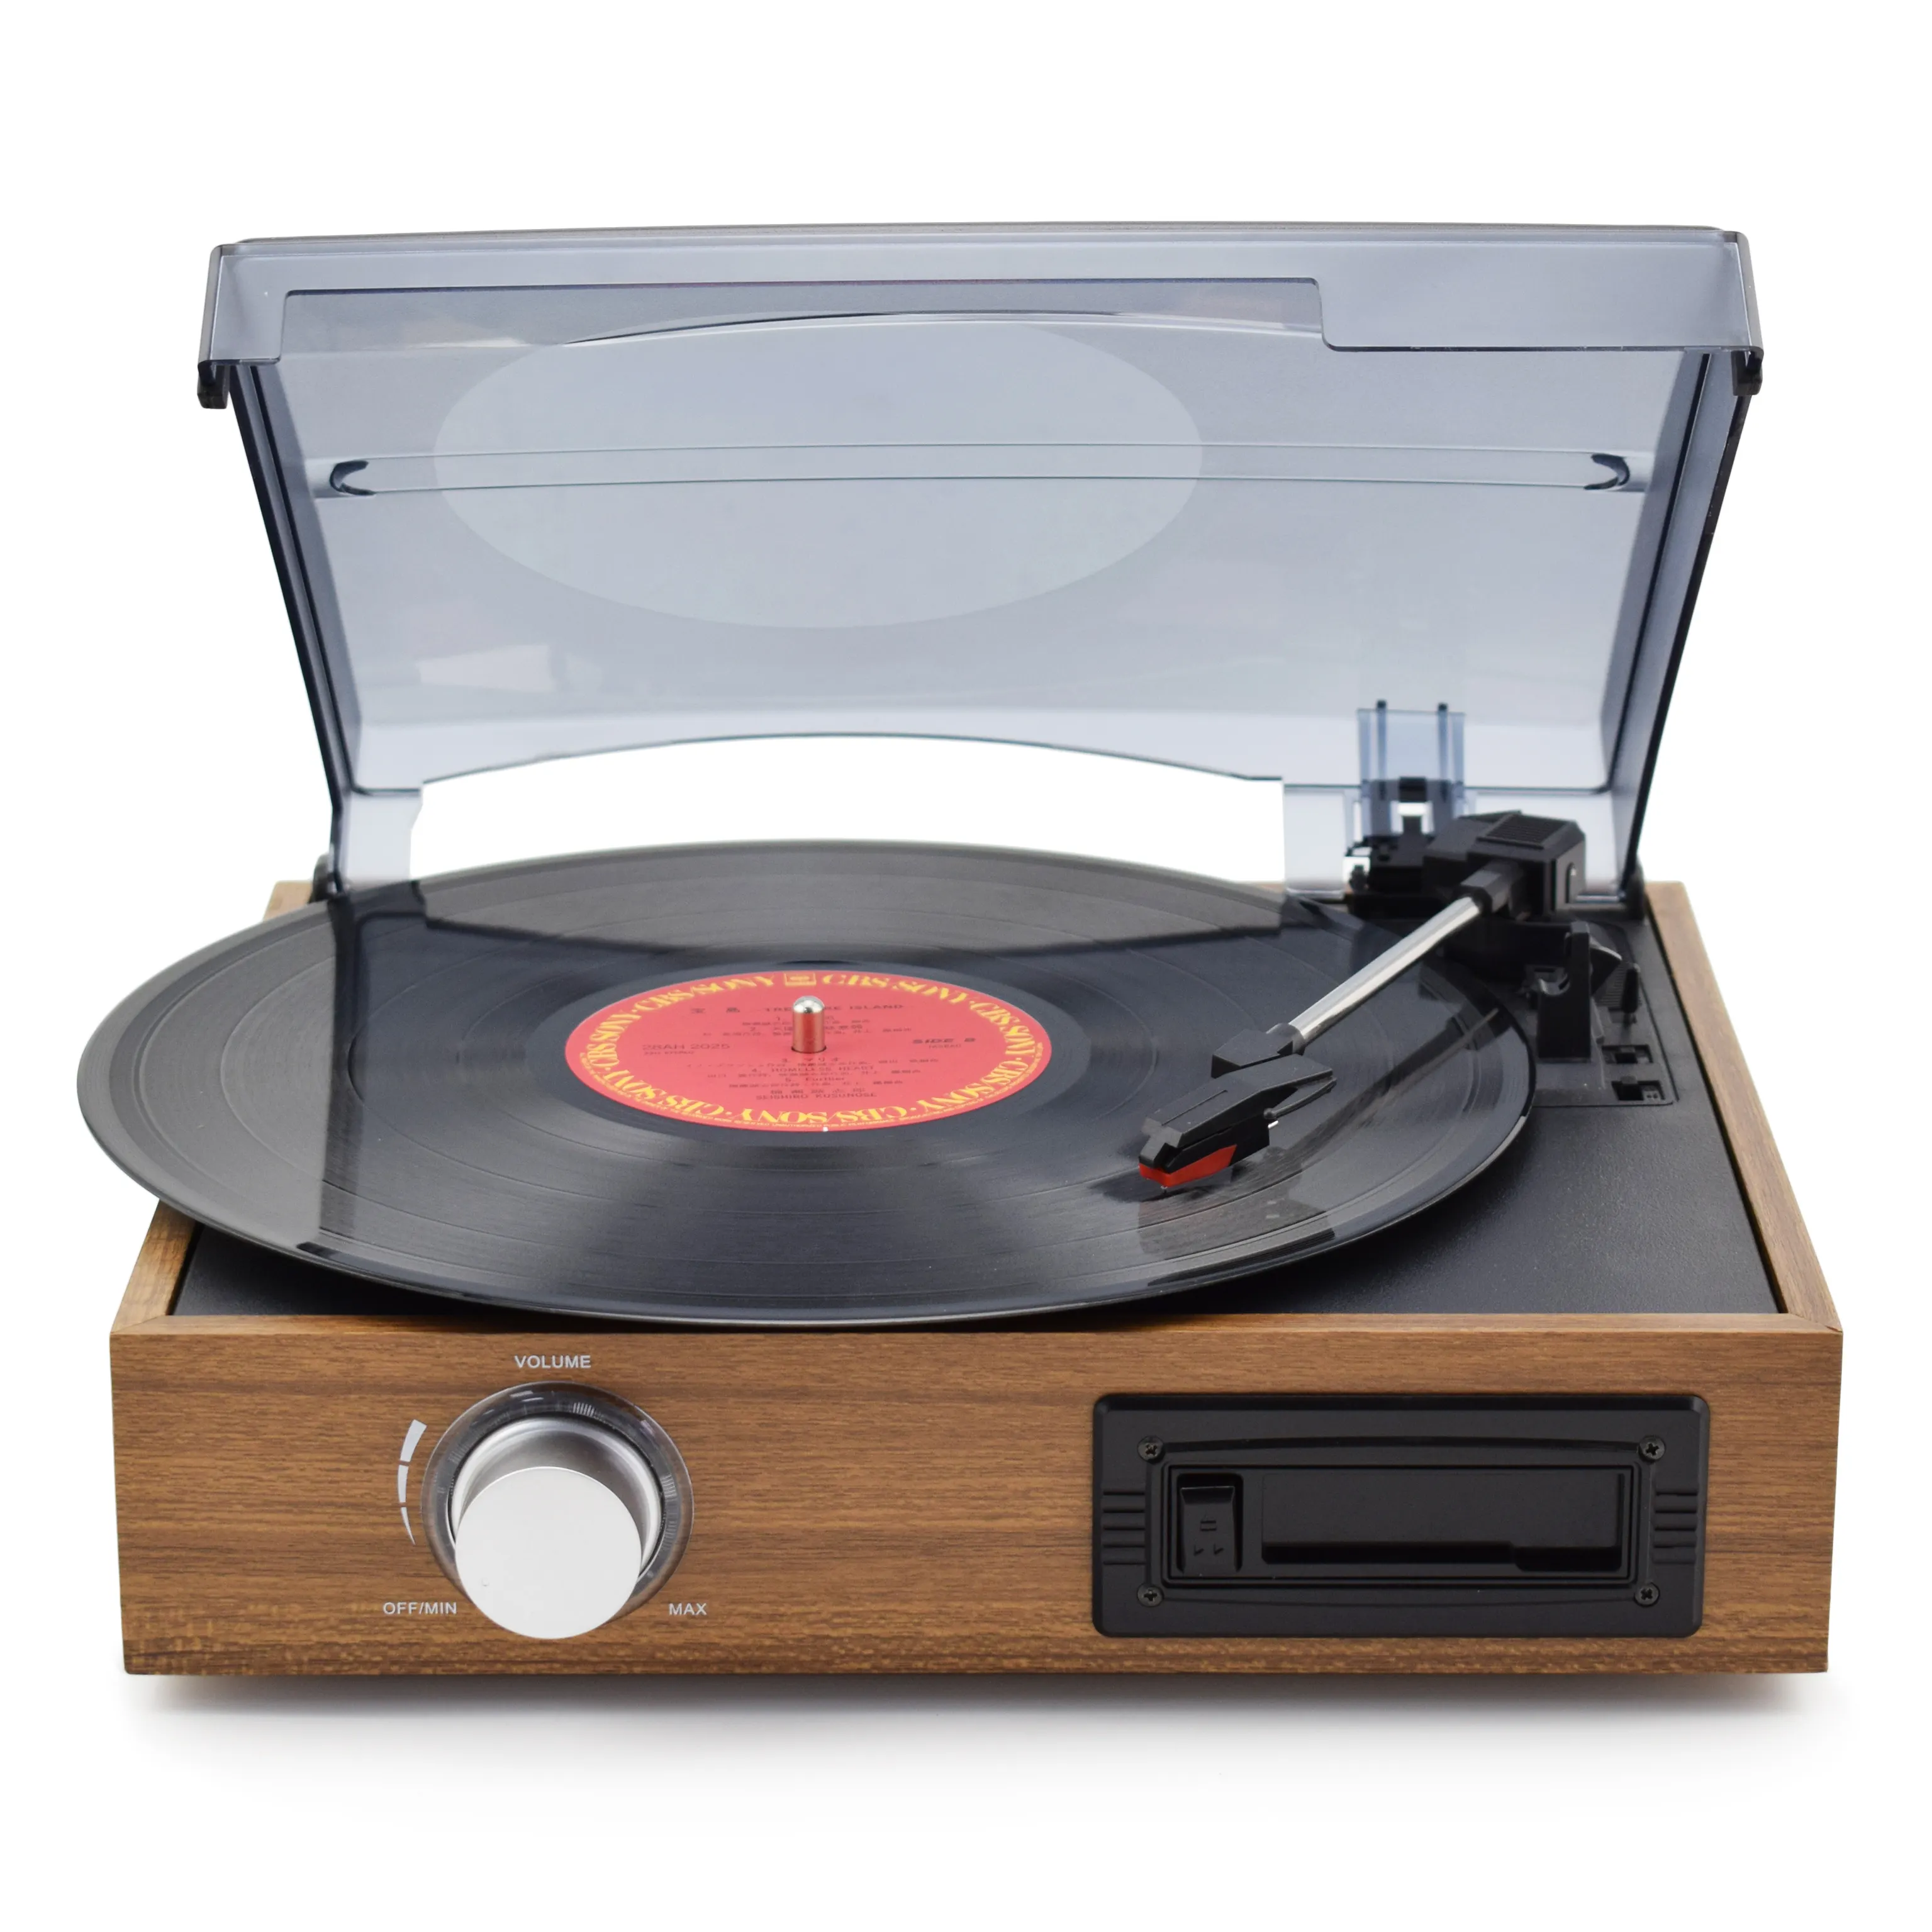 2019 Hot sale classic wooden gramophone record player vinyl turntable with cassette player& built in speakers